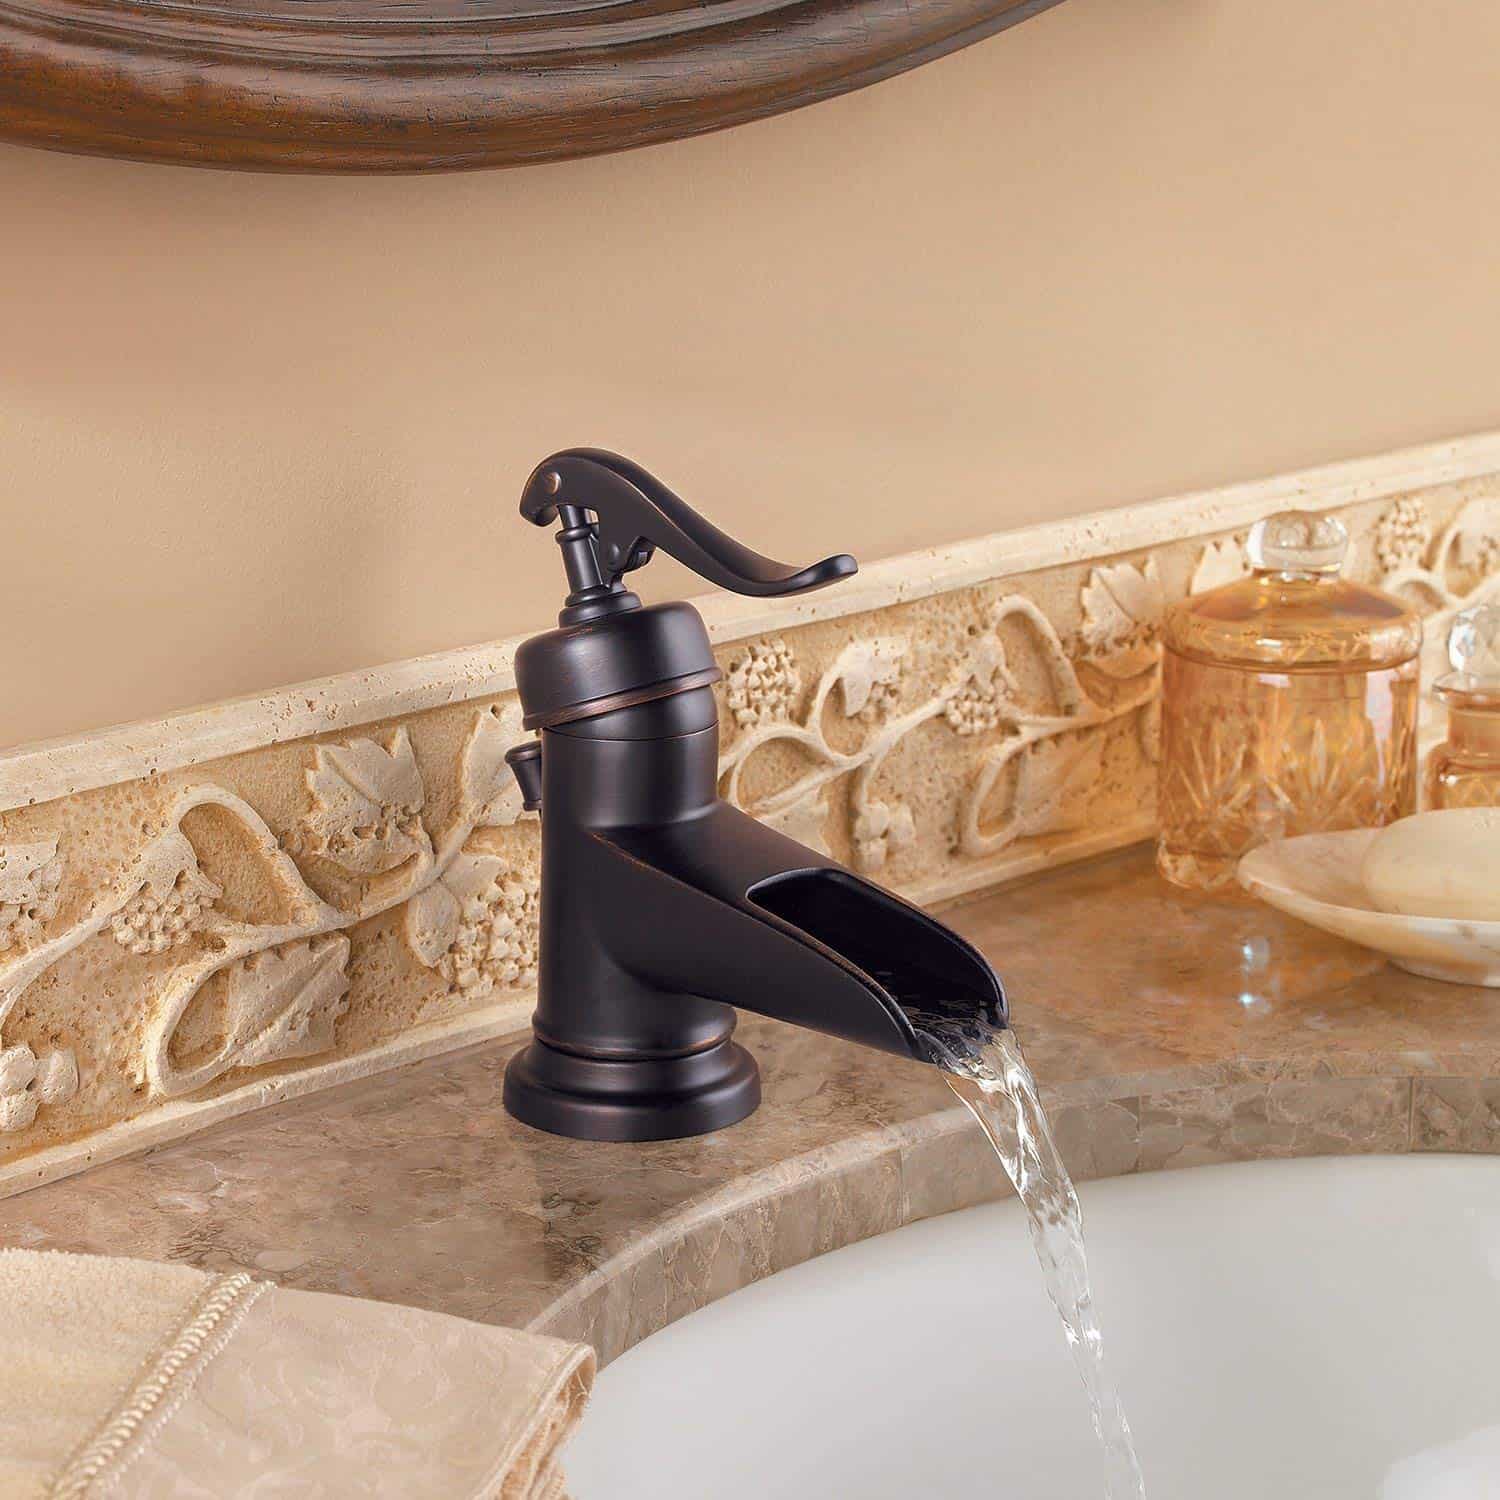 10 Stylish Bathroom Faucets [TOP 2021] Bestazy Reviews